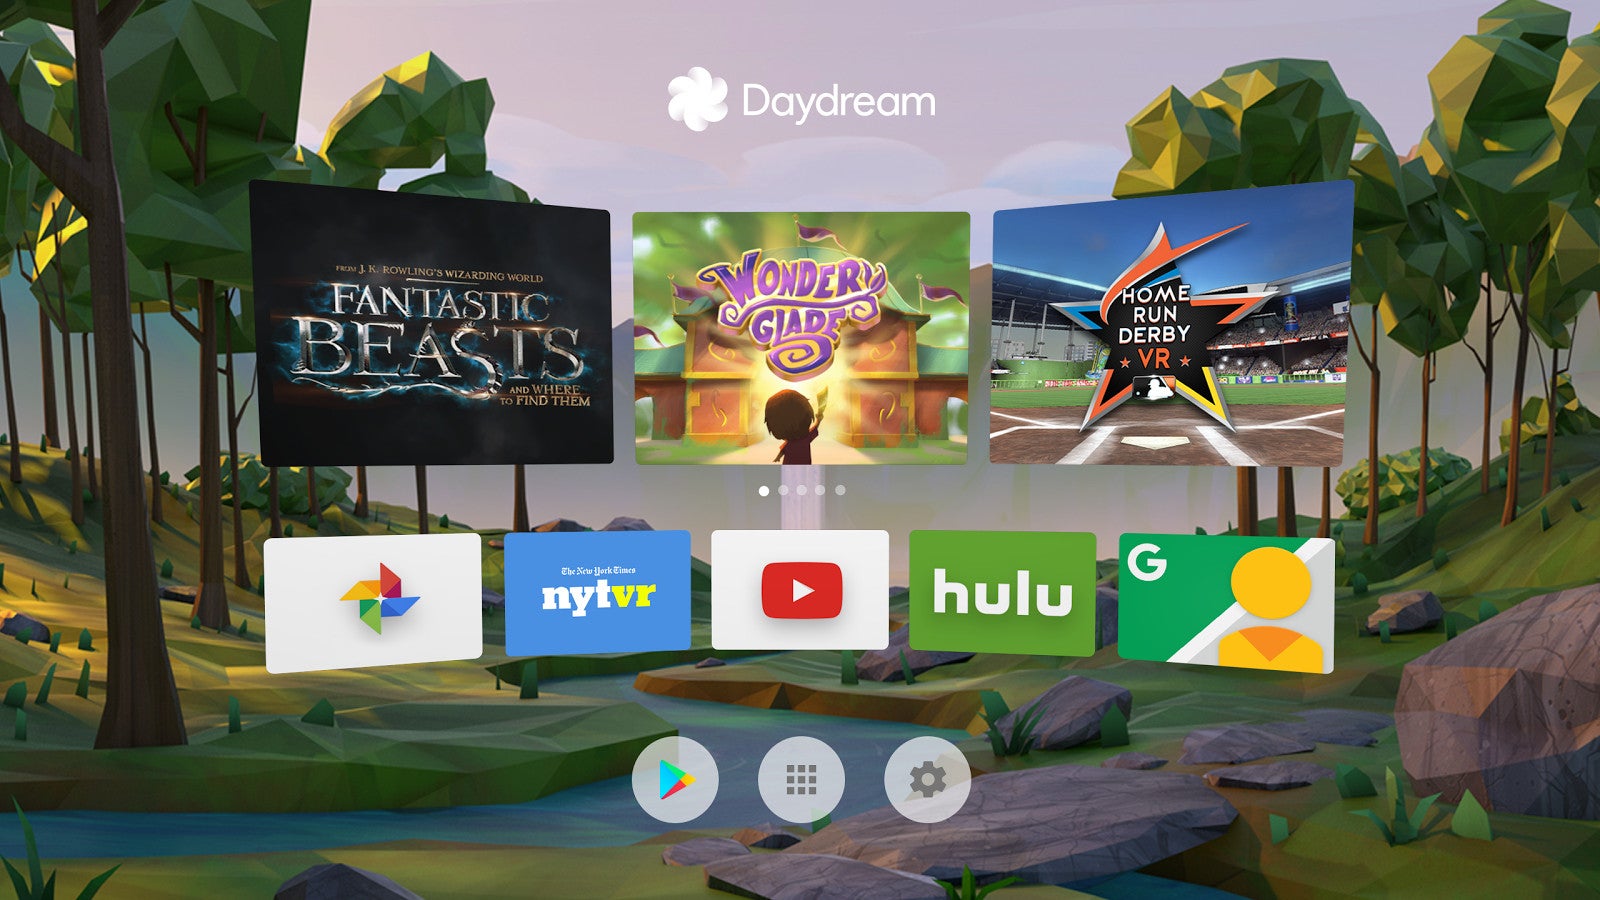 Google updates Daydream app with battery indicator, more